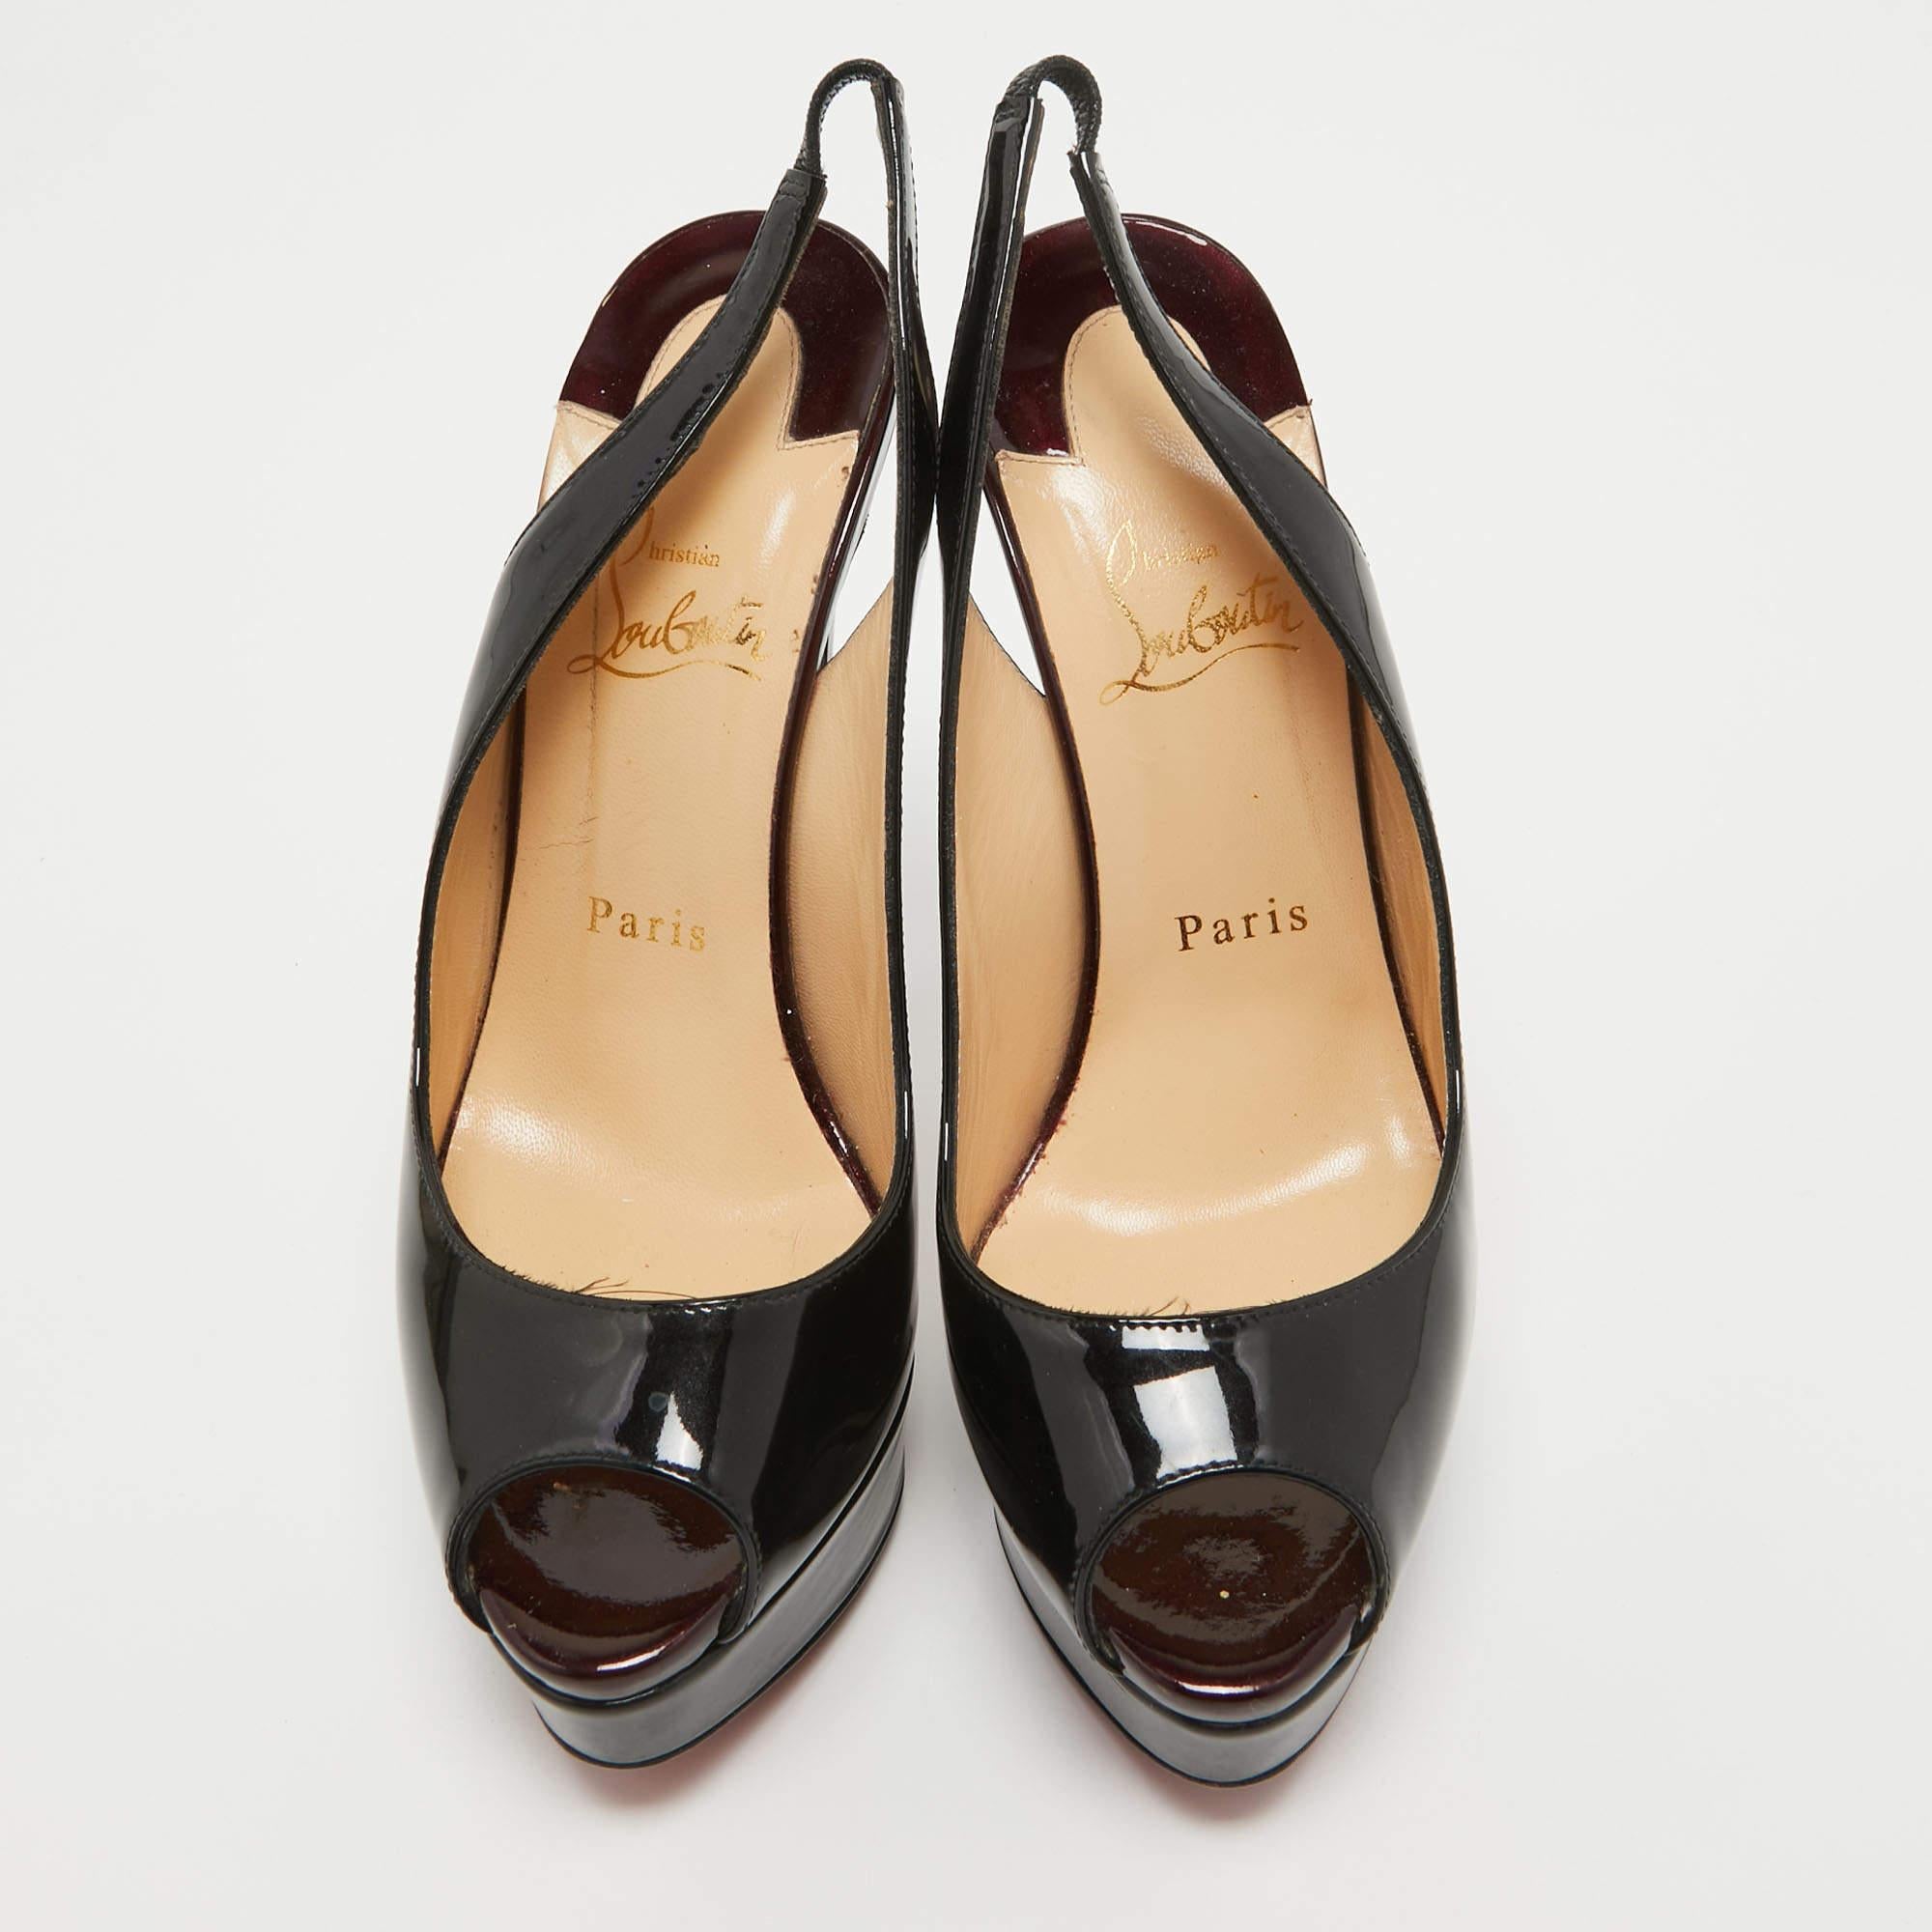 Stand out from the crowd with this luxurious pair of Louboutins that exude high fashion with class. Crafted from patent leather, this is a creation from their Lady Peep collection. It features a black shade with peep toes and an architectural shape.